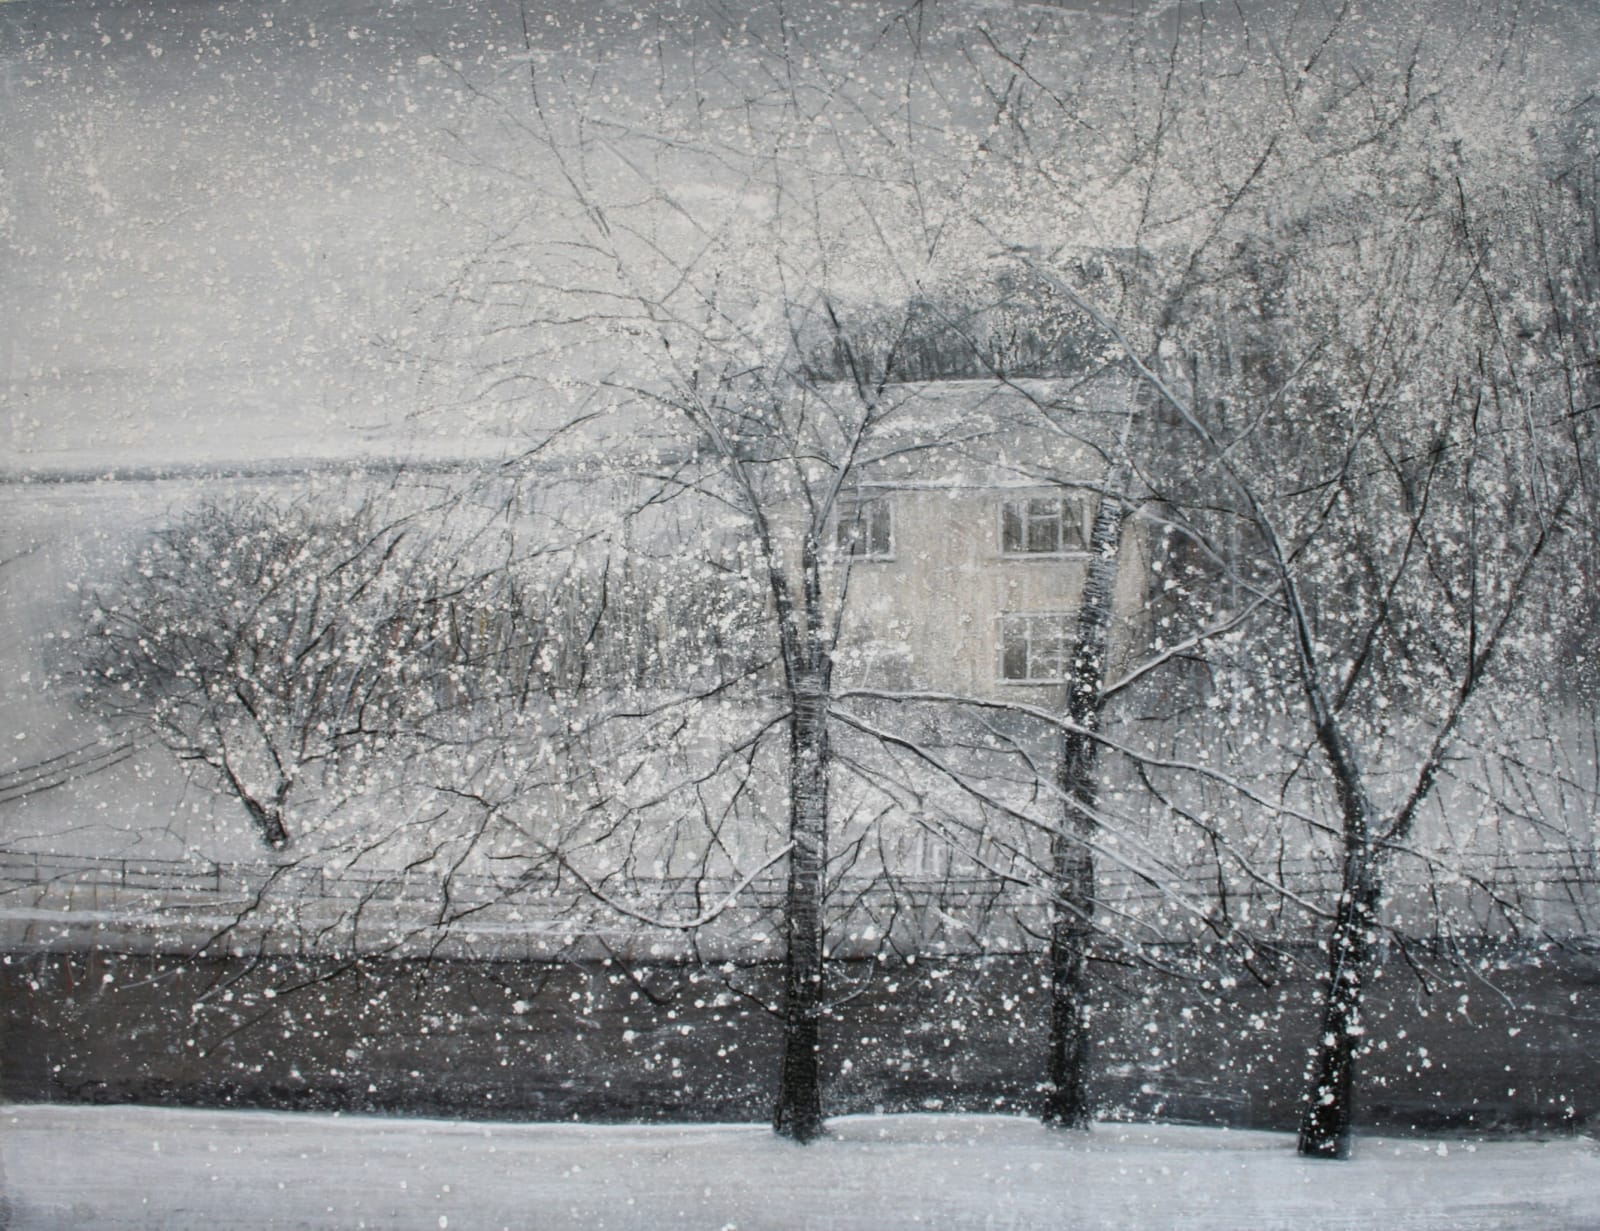 THOMAS LAMB, House Beside River in Winter